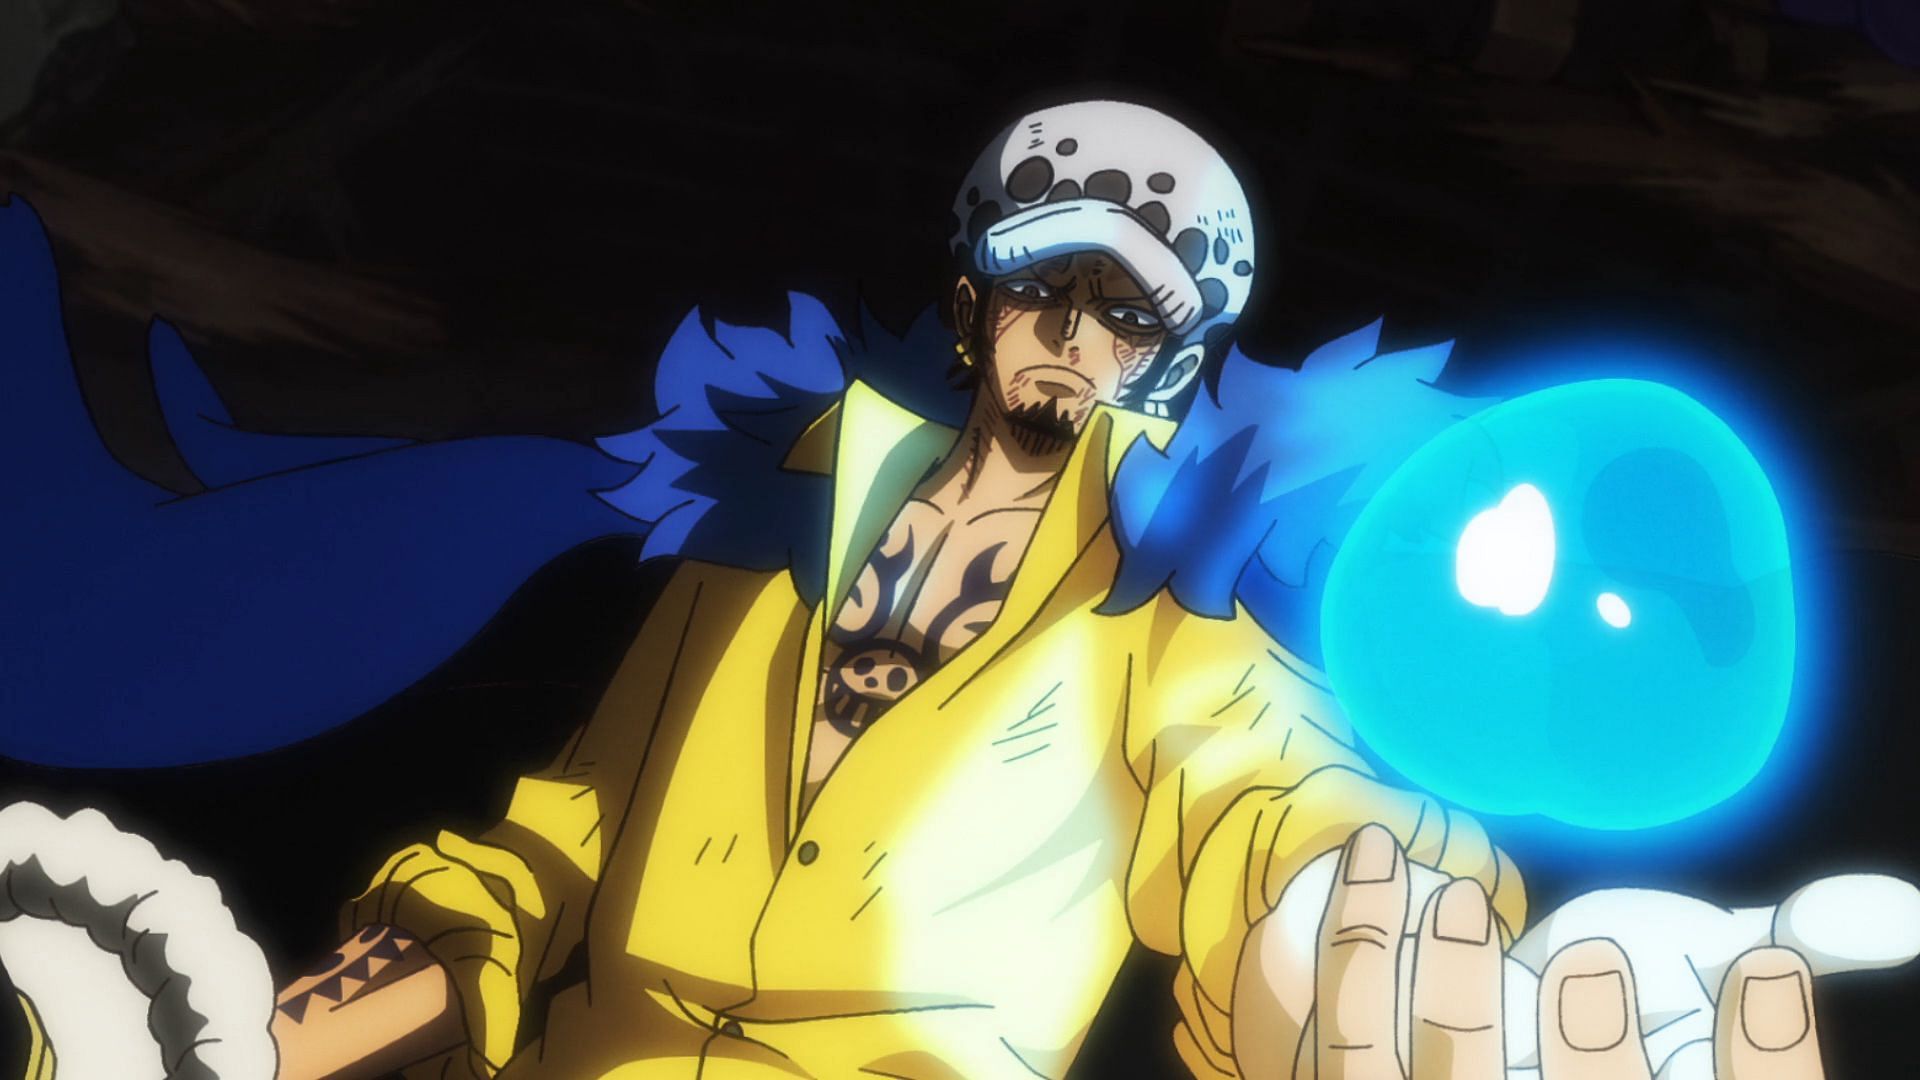 Law as seen in the One Piece anime series (Image via Toei Animation)